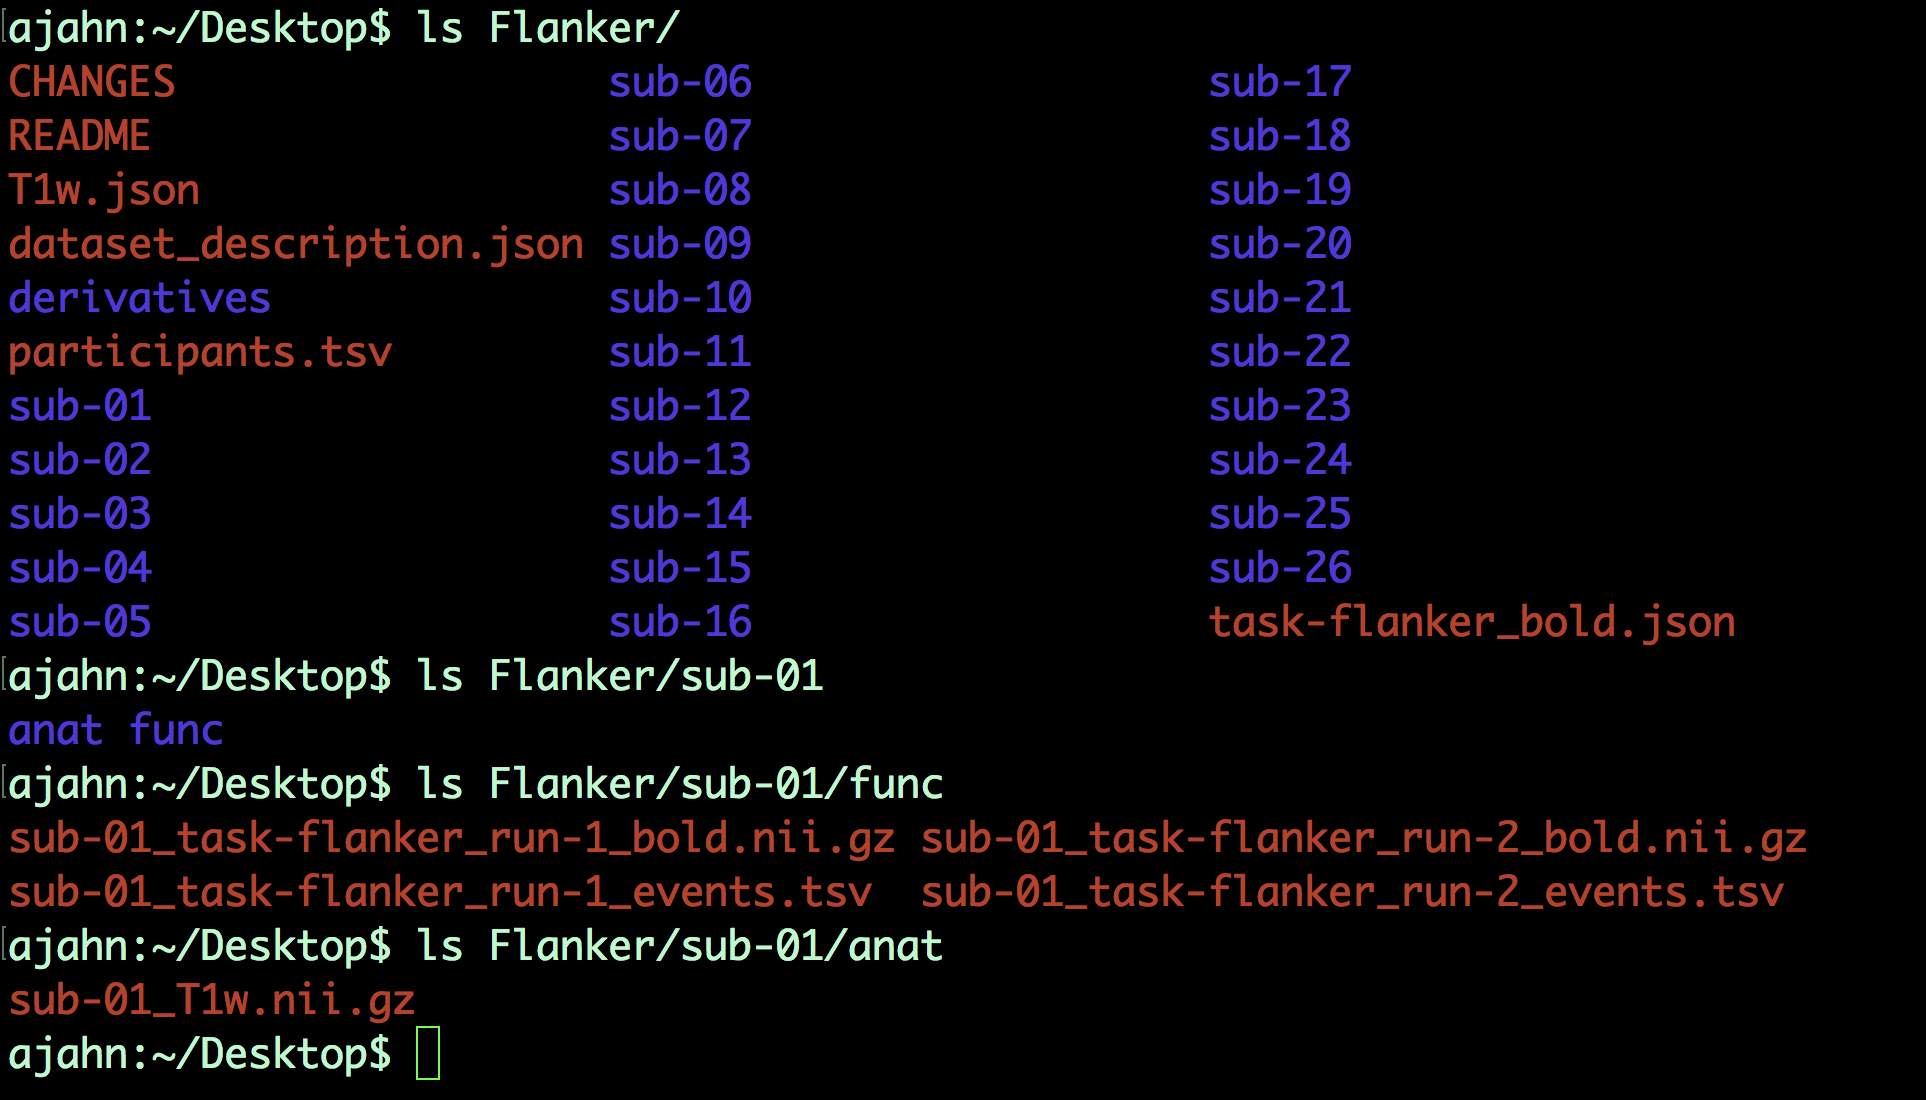 ../../_images/03_Flanker_DataStructure.png